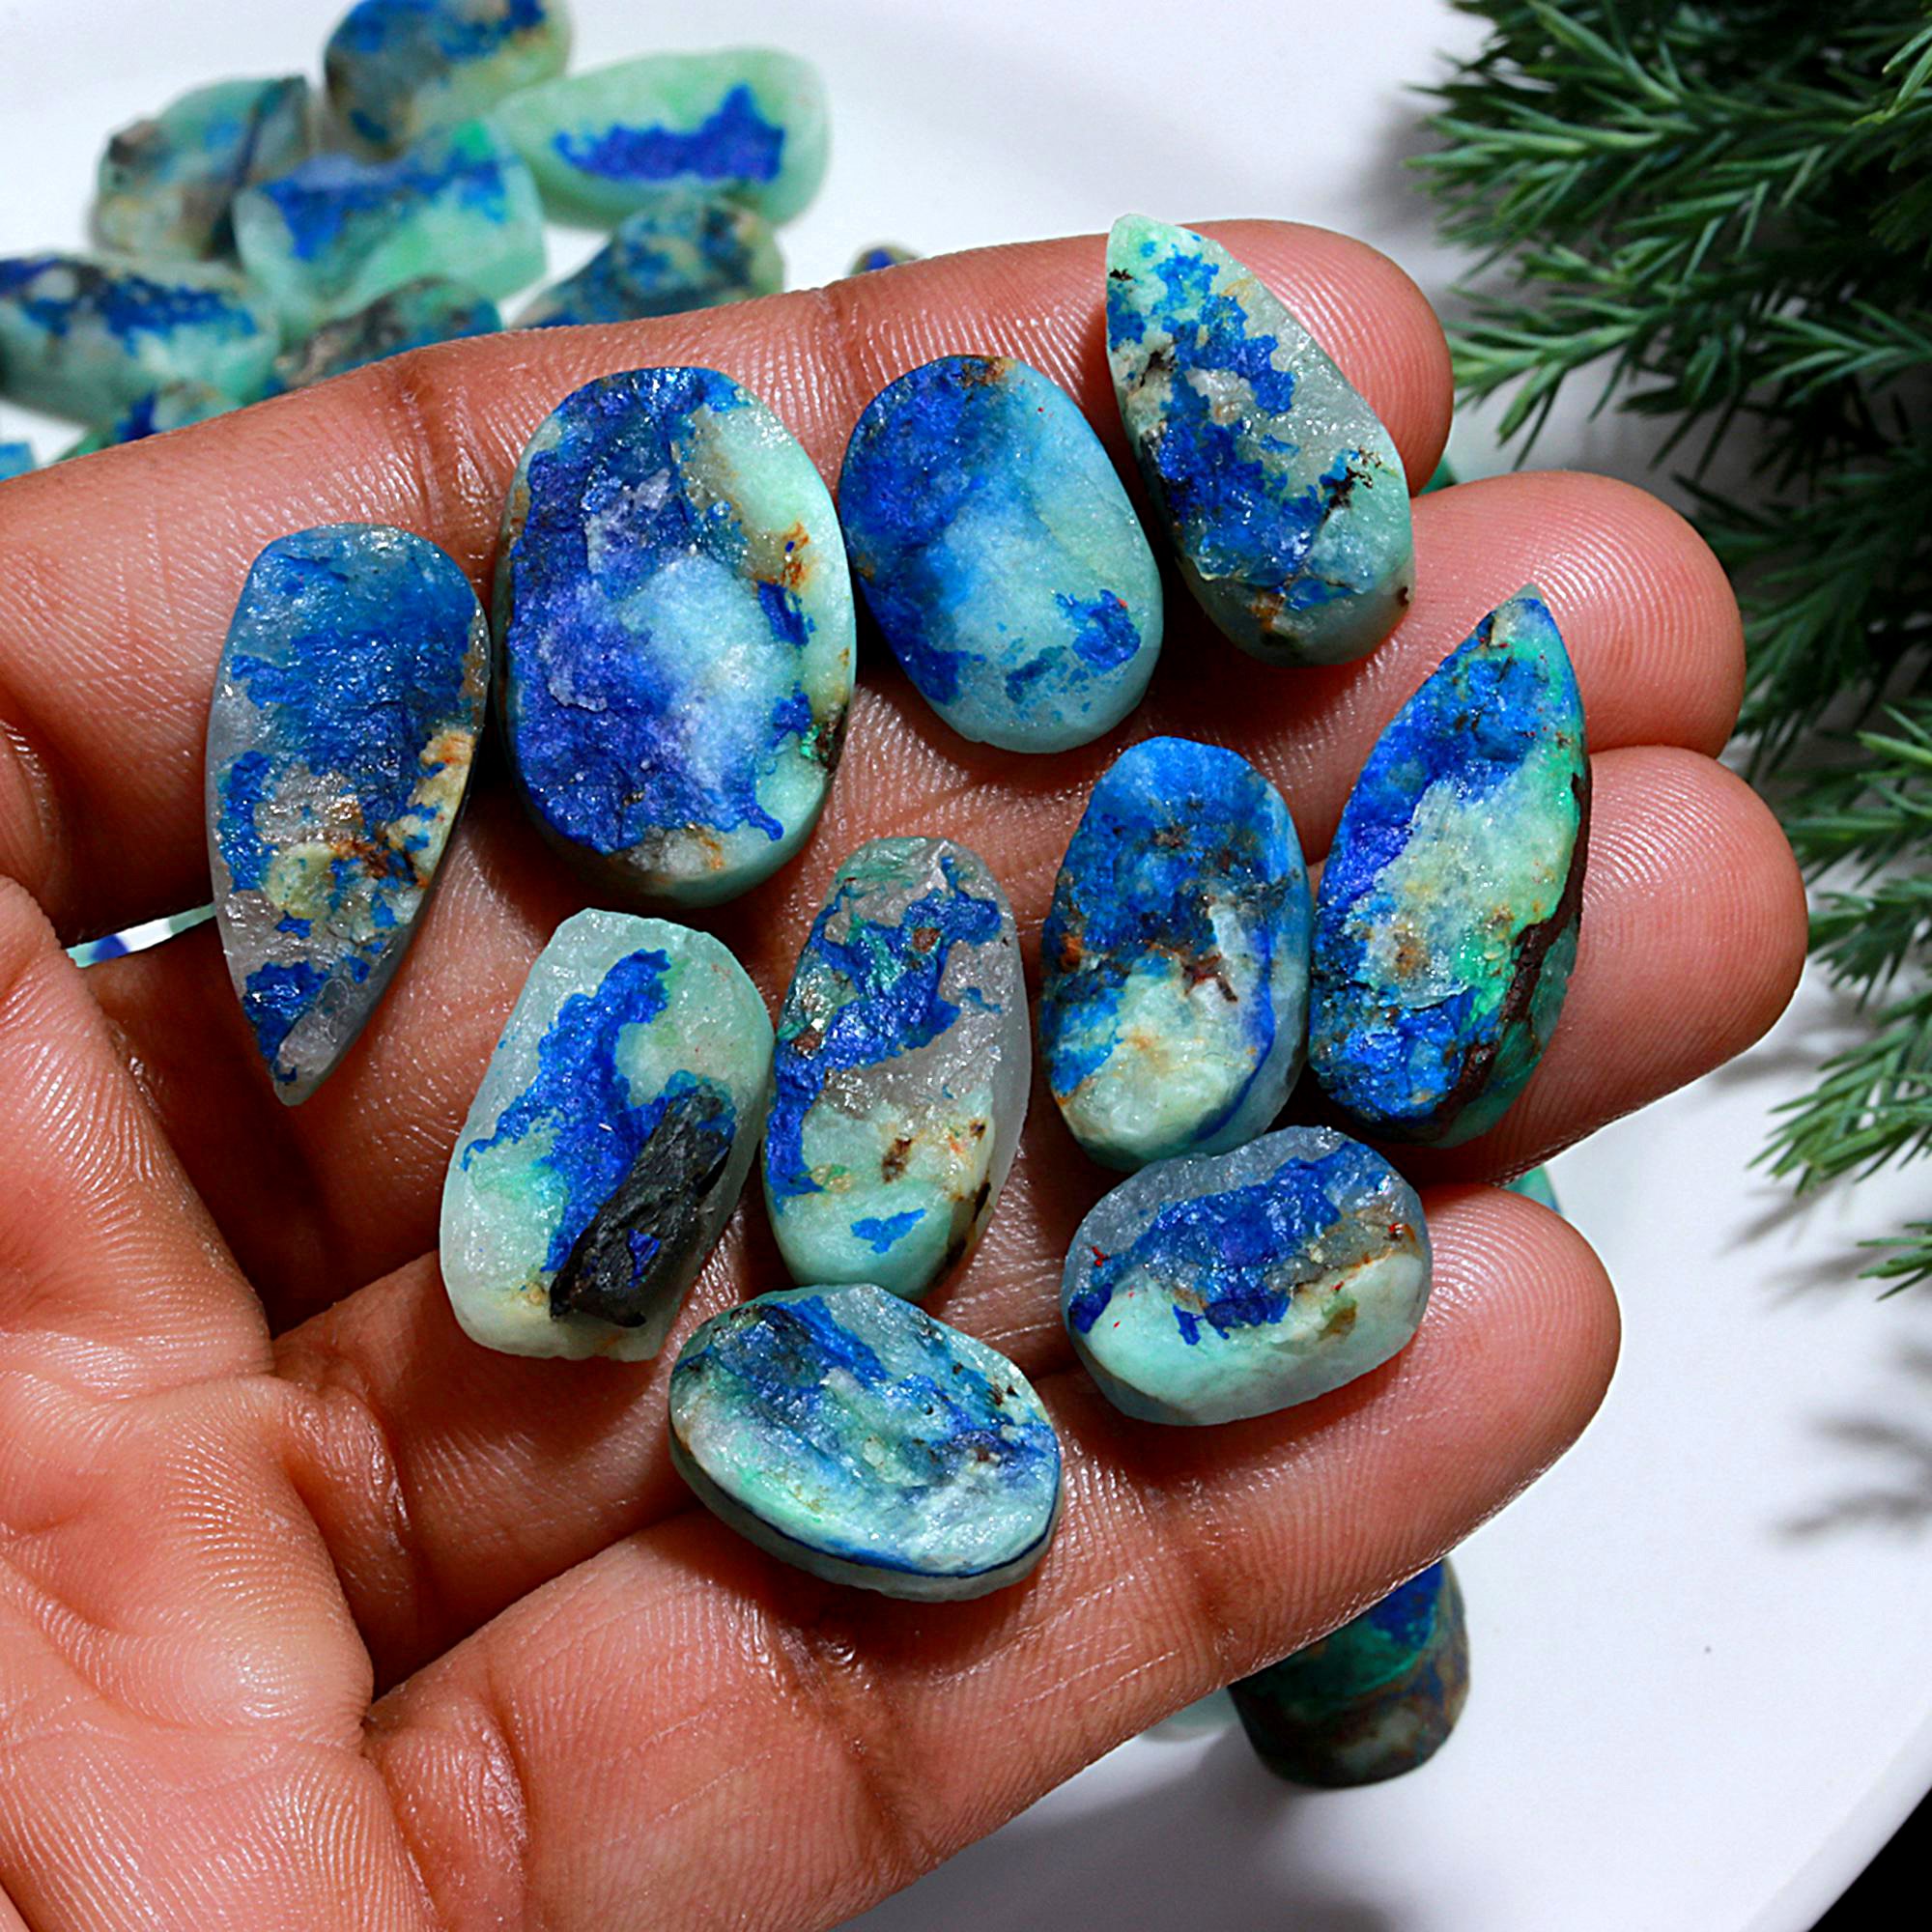 94 Pcs 552.Cts Natural Azurite Druzy Unpolished Loose Cabochon Gemstone For Jewelry Wholesale Lot Size 23x11 9x10mm#1176